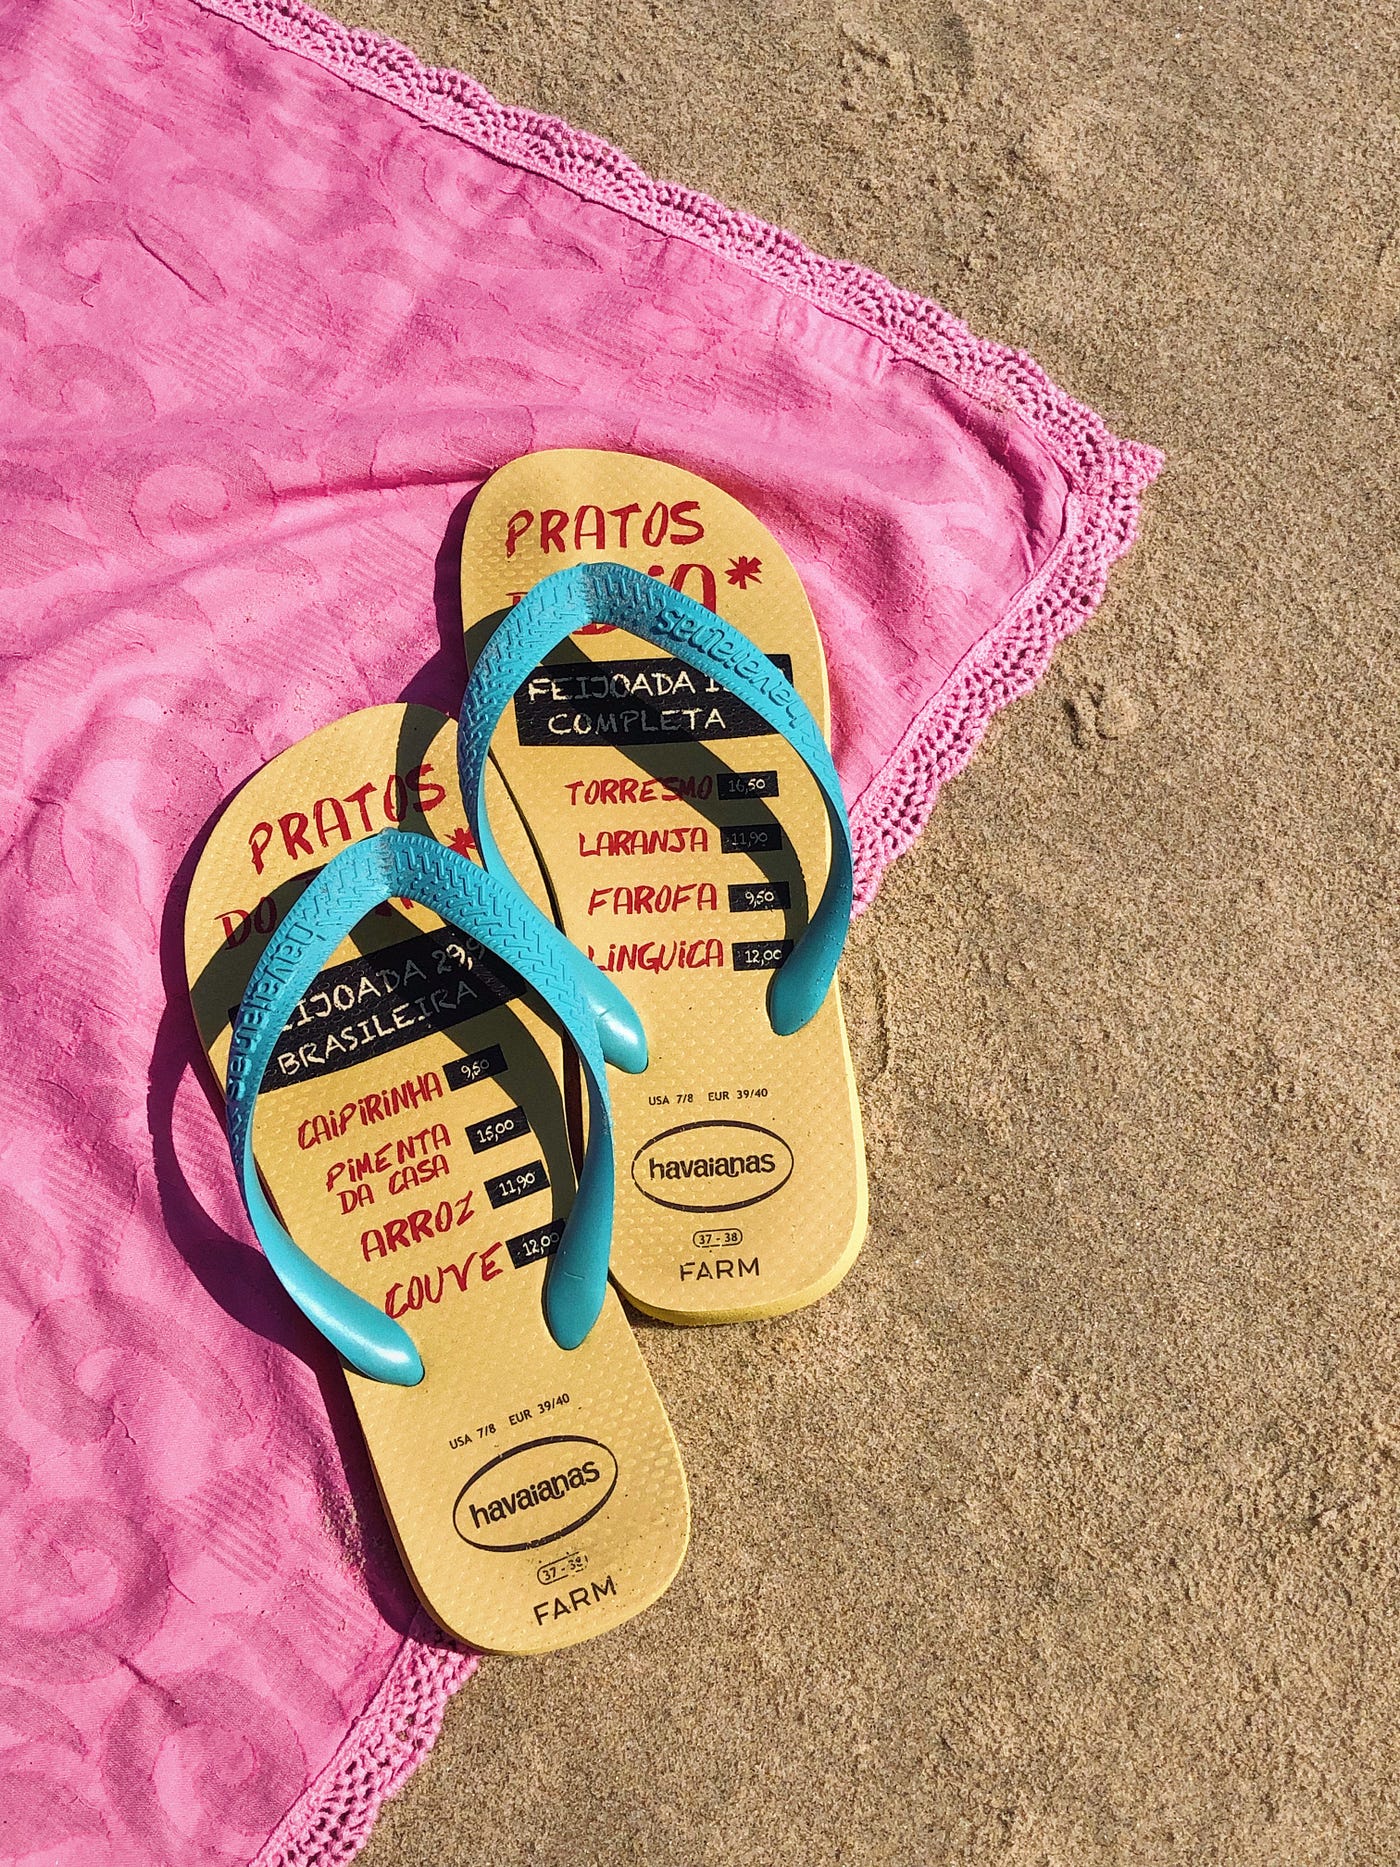 How an amateur design change played a crucial role in a flip-flop empire |  by Ariel V S | Medium